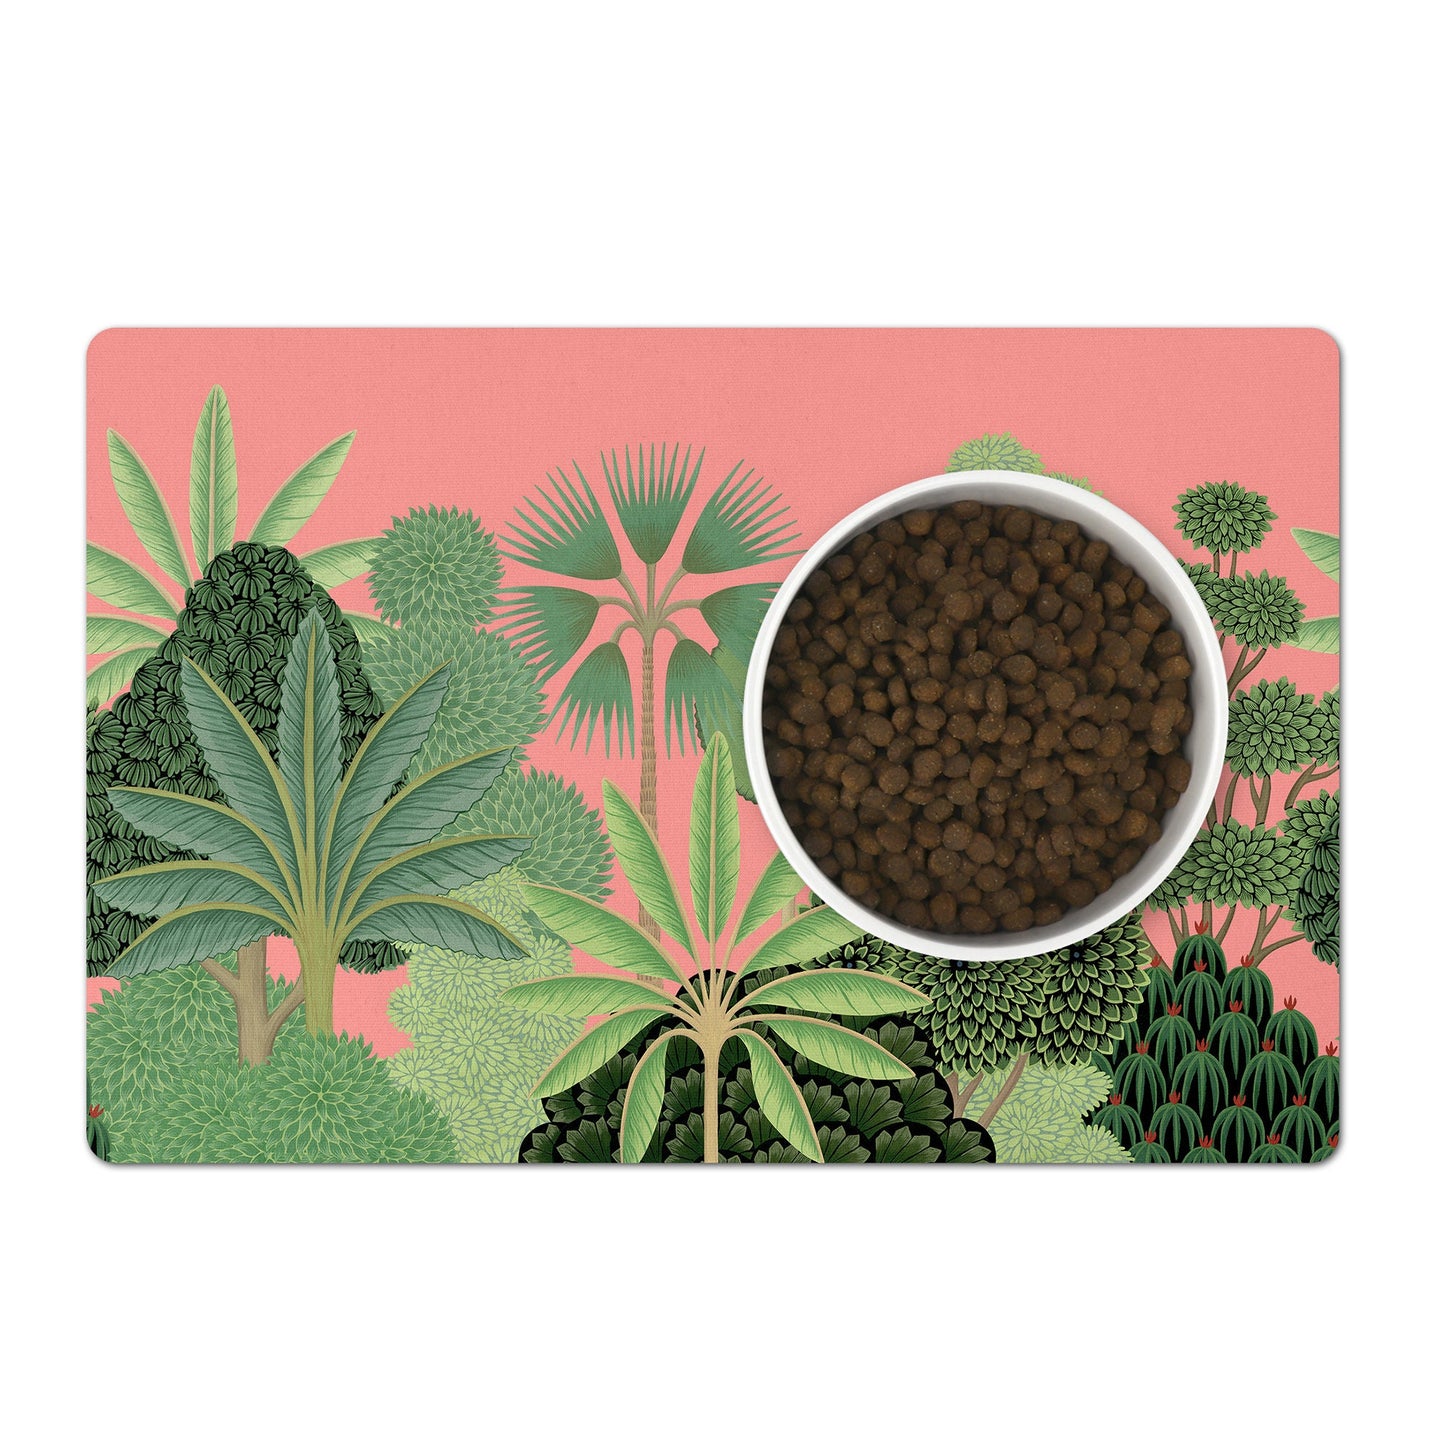 Tropical Pink Pet Food Mat with Palm Tree Print for pet food bowls.